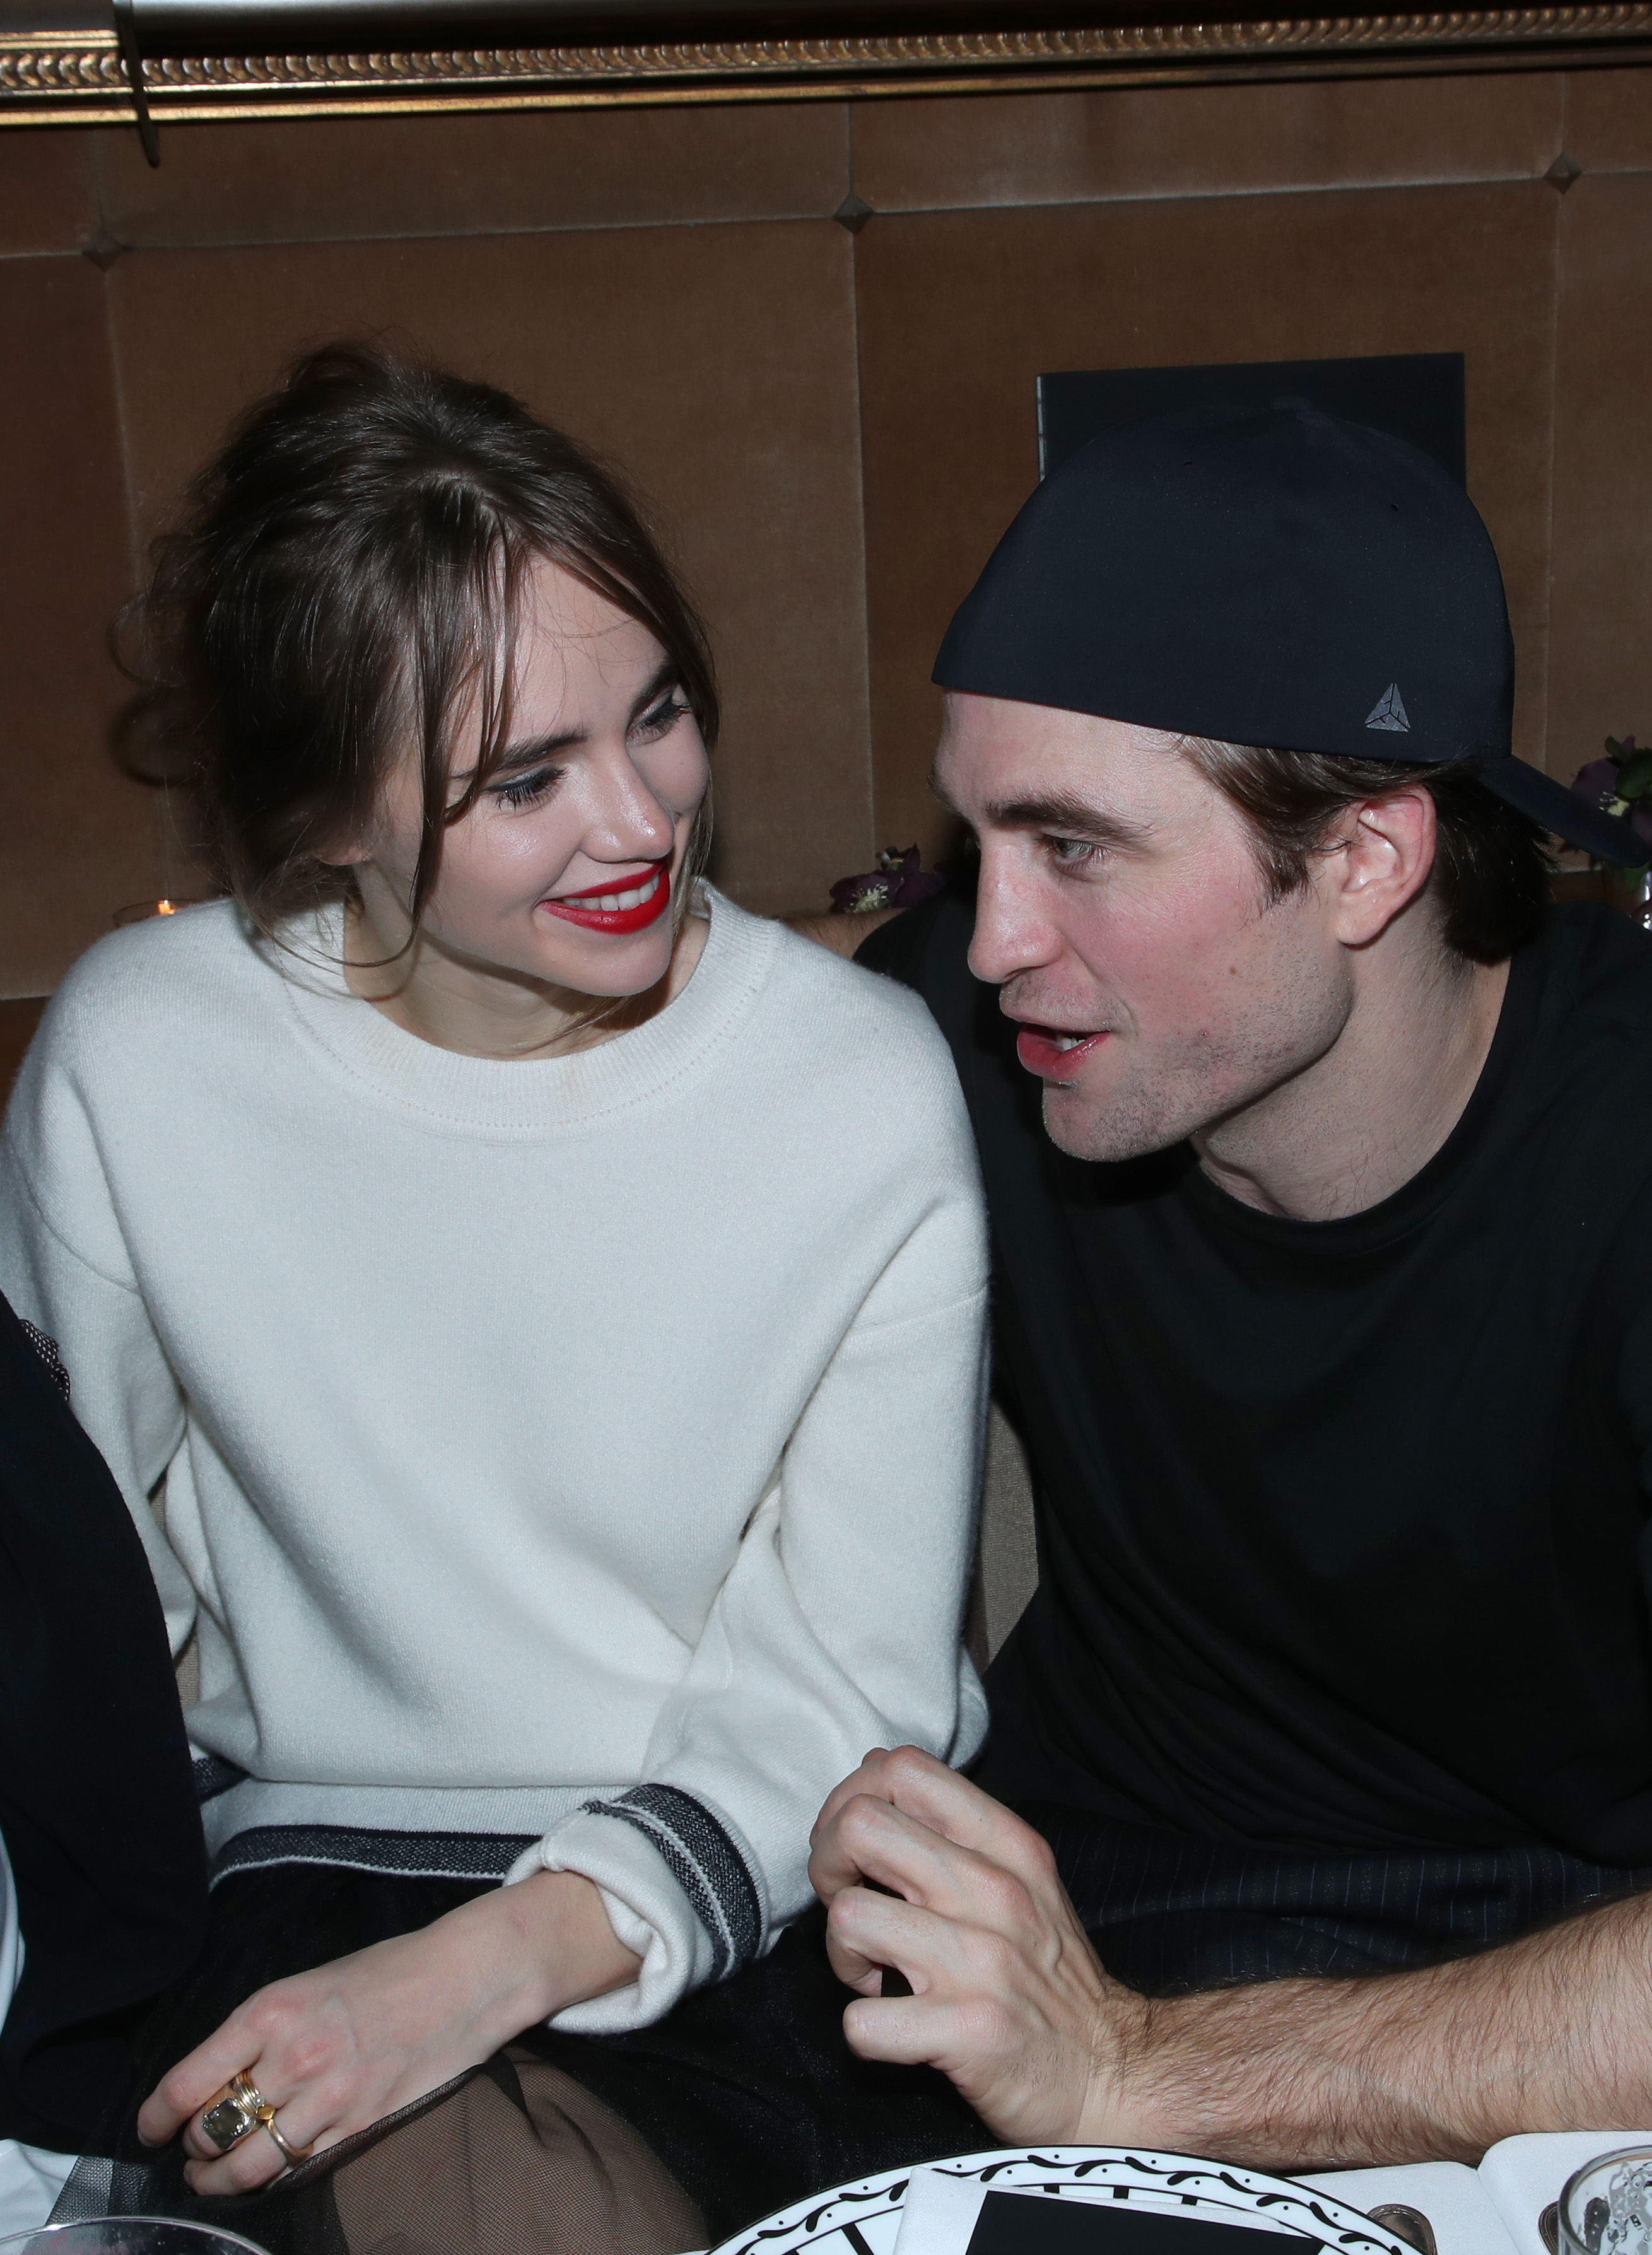 Suki Waterhouse and Robert Pattinson at the Dior Perfume Dinner as part of Paris Fashion Week in Paris, France on January 17, 2020 | Source: Getty Images